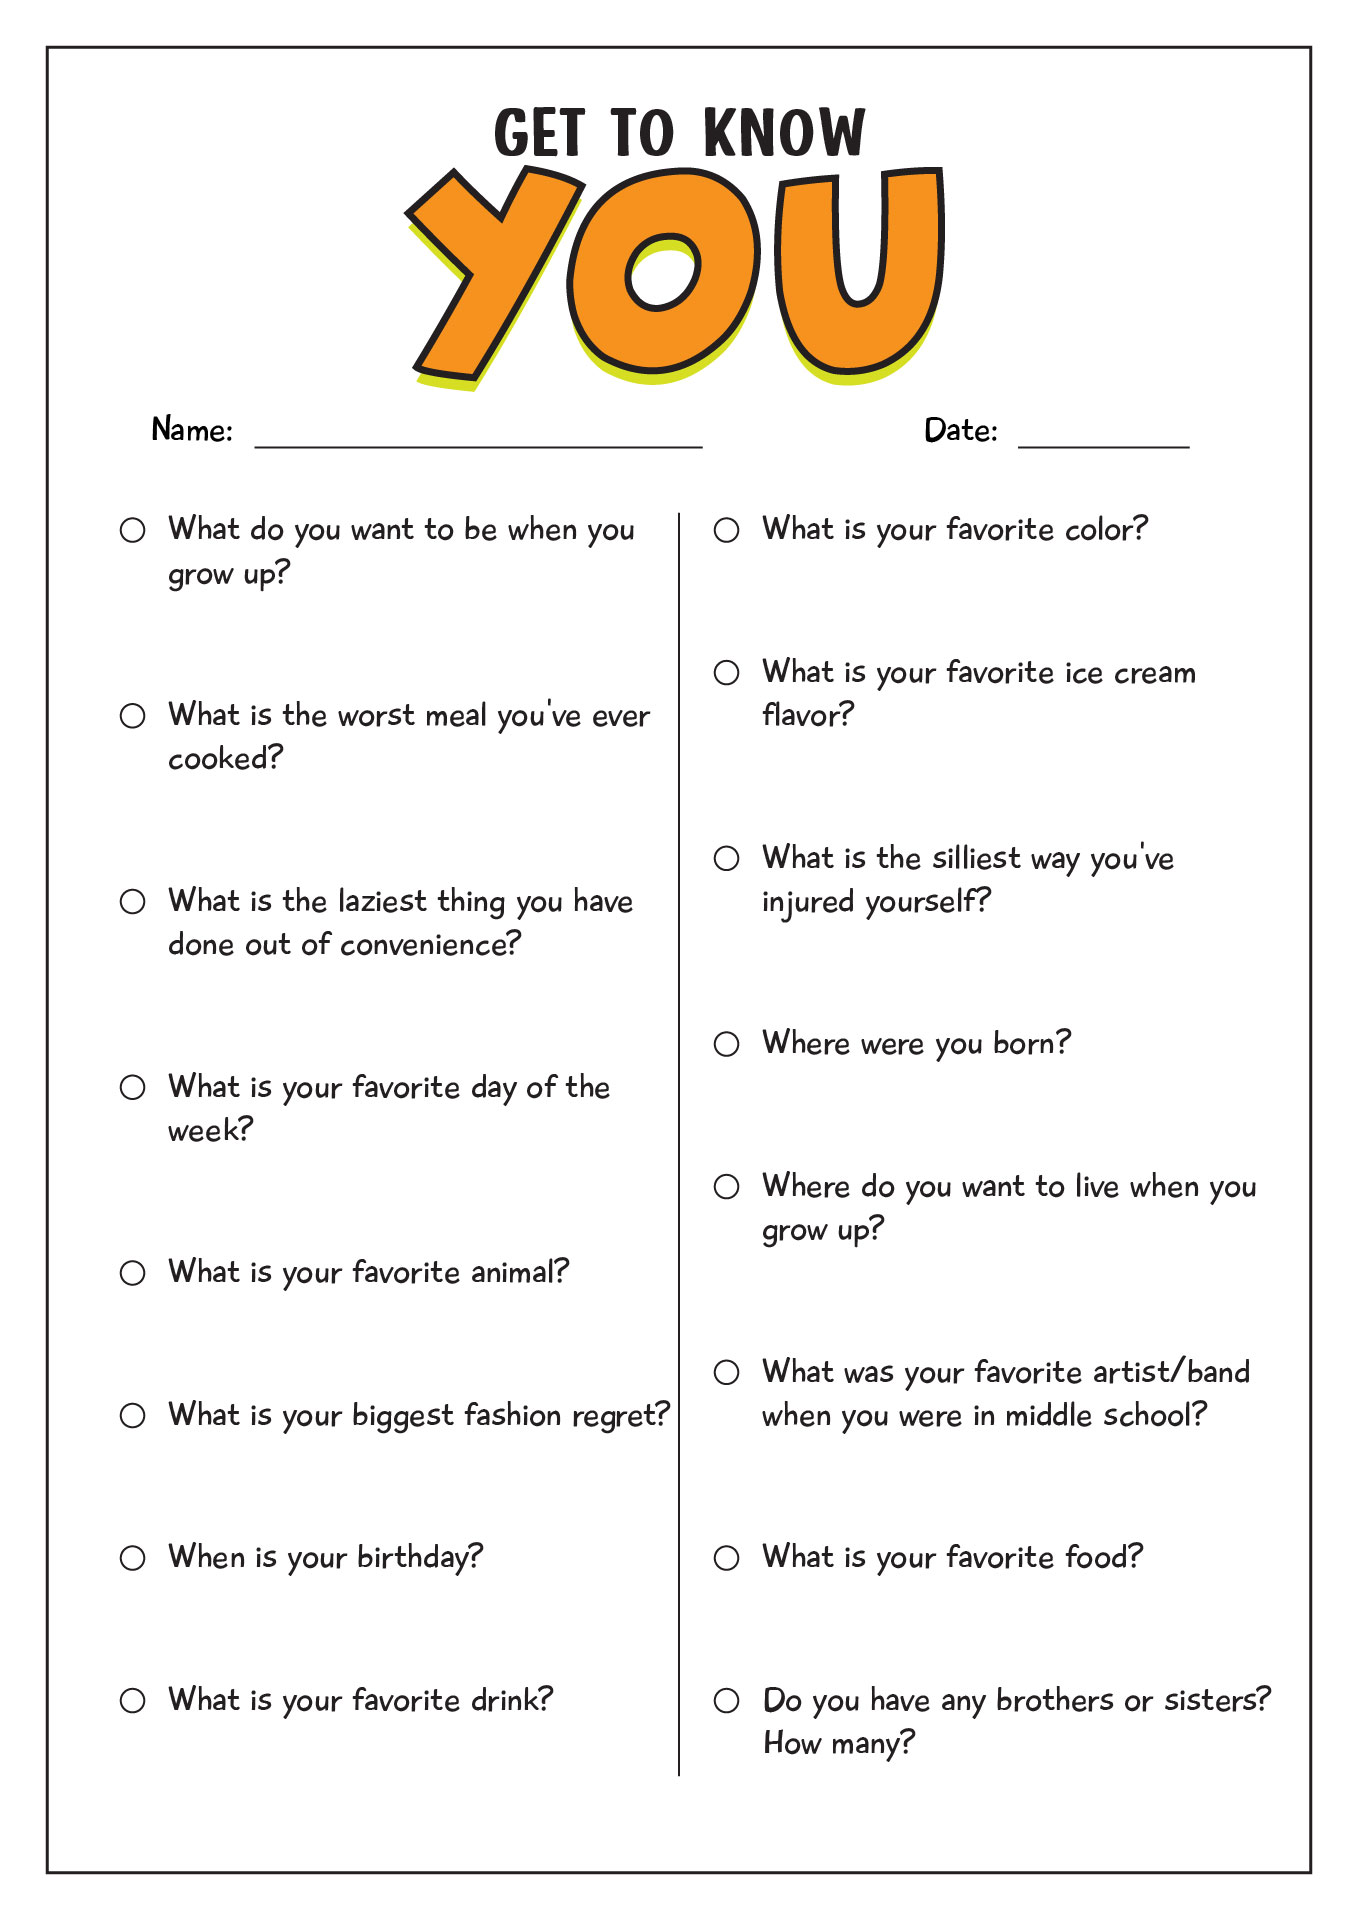 Getting to Know You Questionnaire Printable